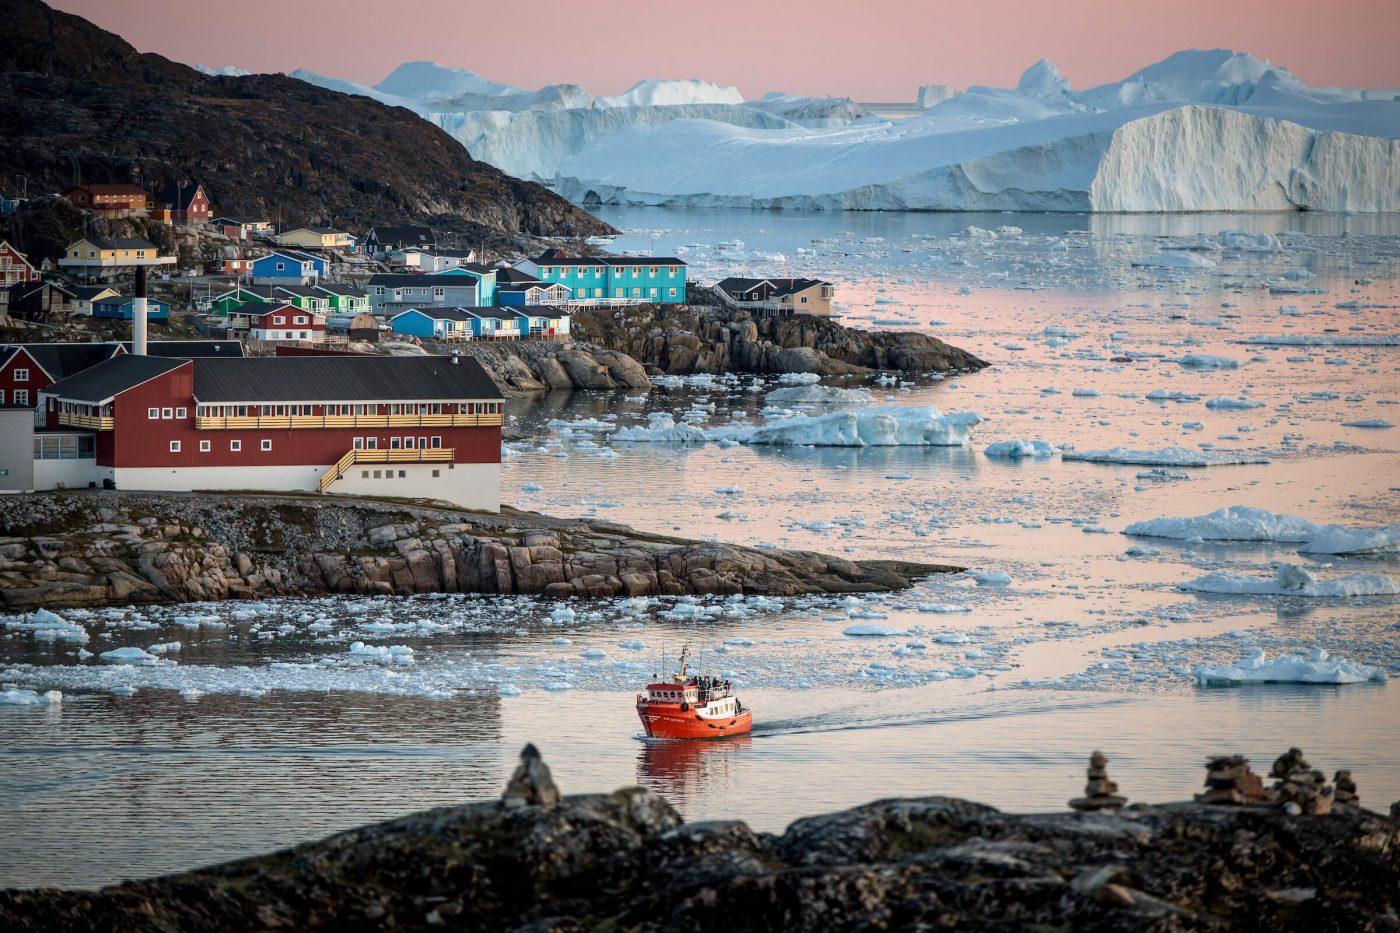 A passenger boat near Ilulissat and the ice fjord in Greenland. By Mads Pihl